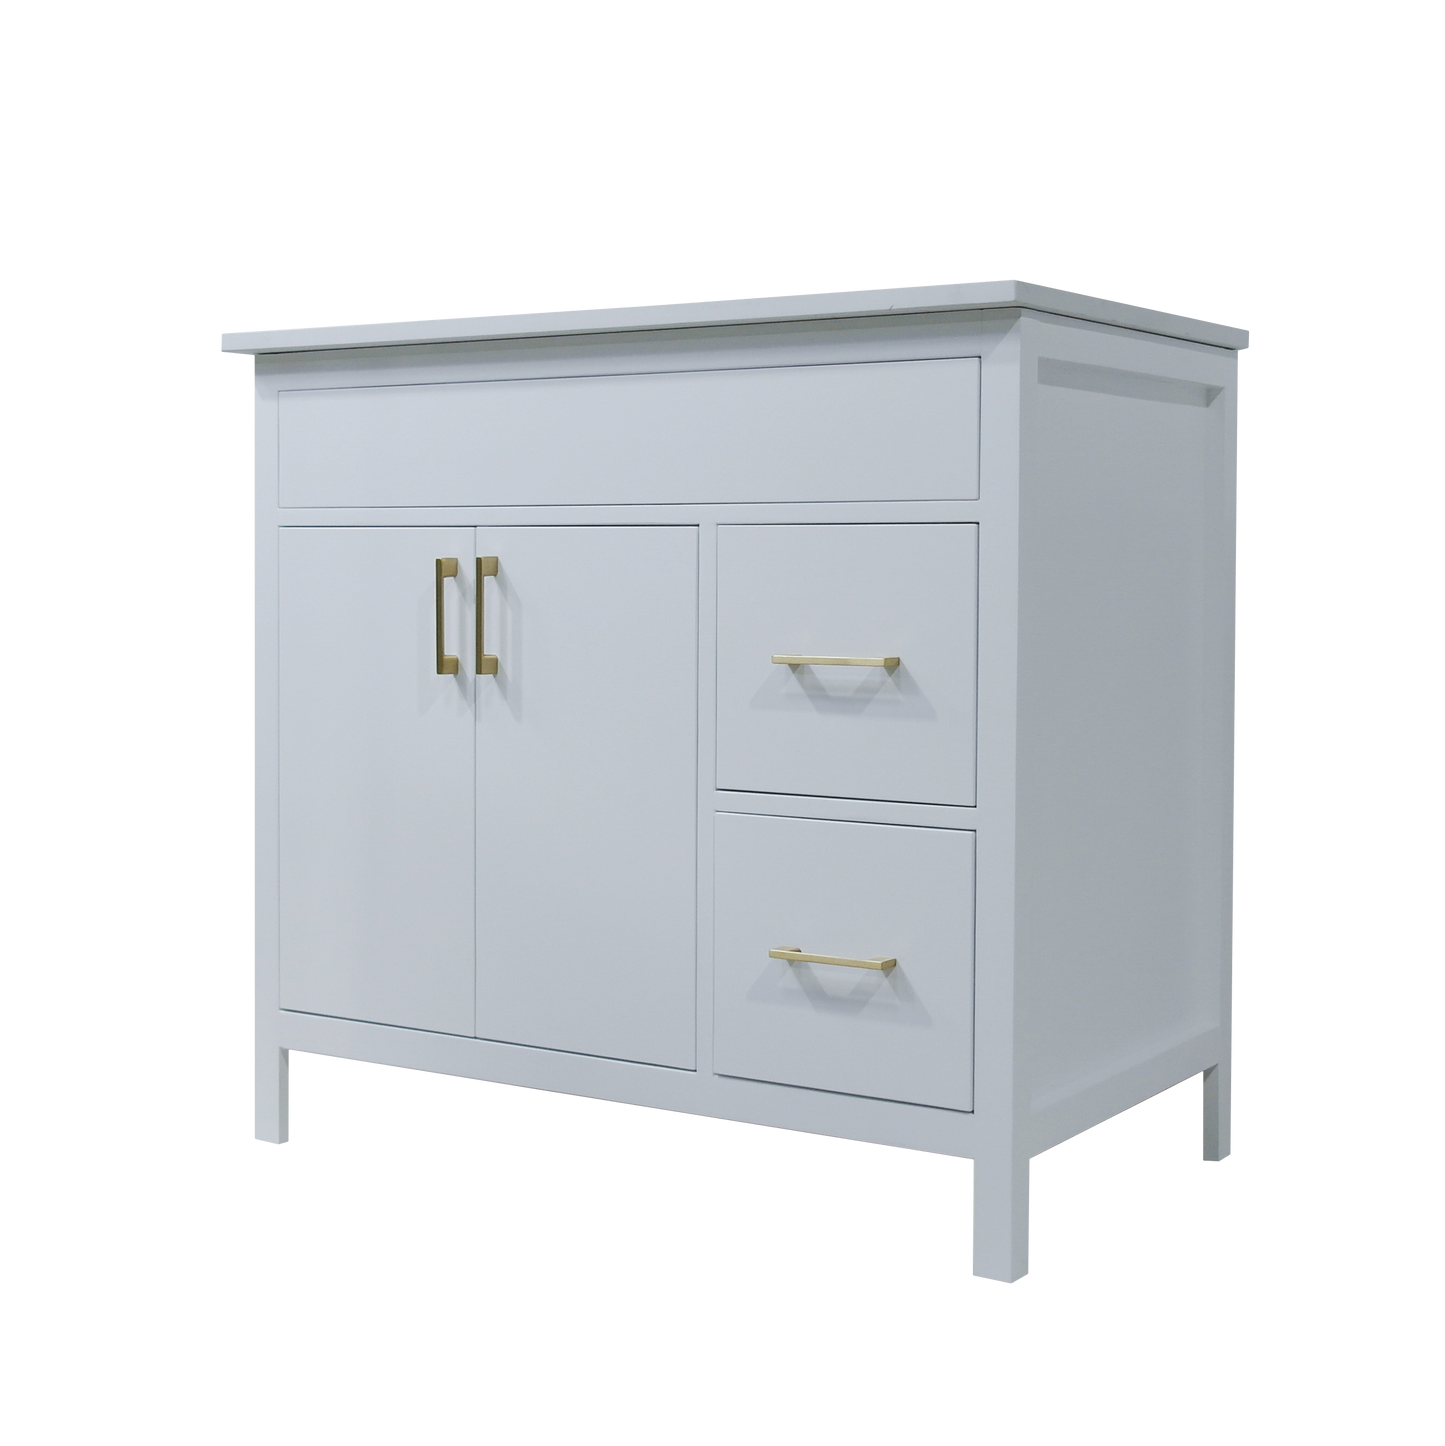 36" Mirea style white wooden vanity with 2 drawers on the right with Quartz